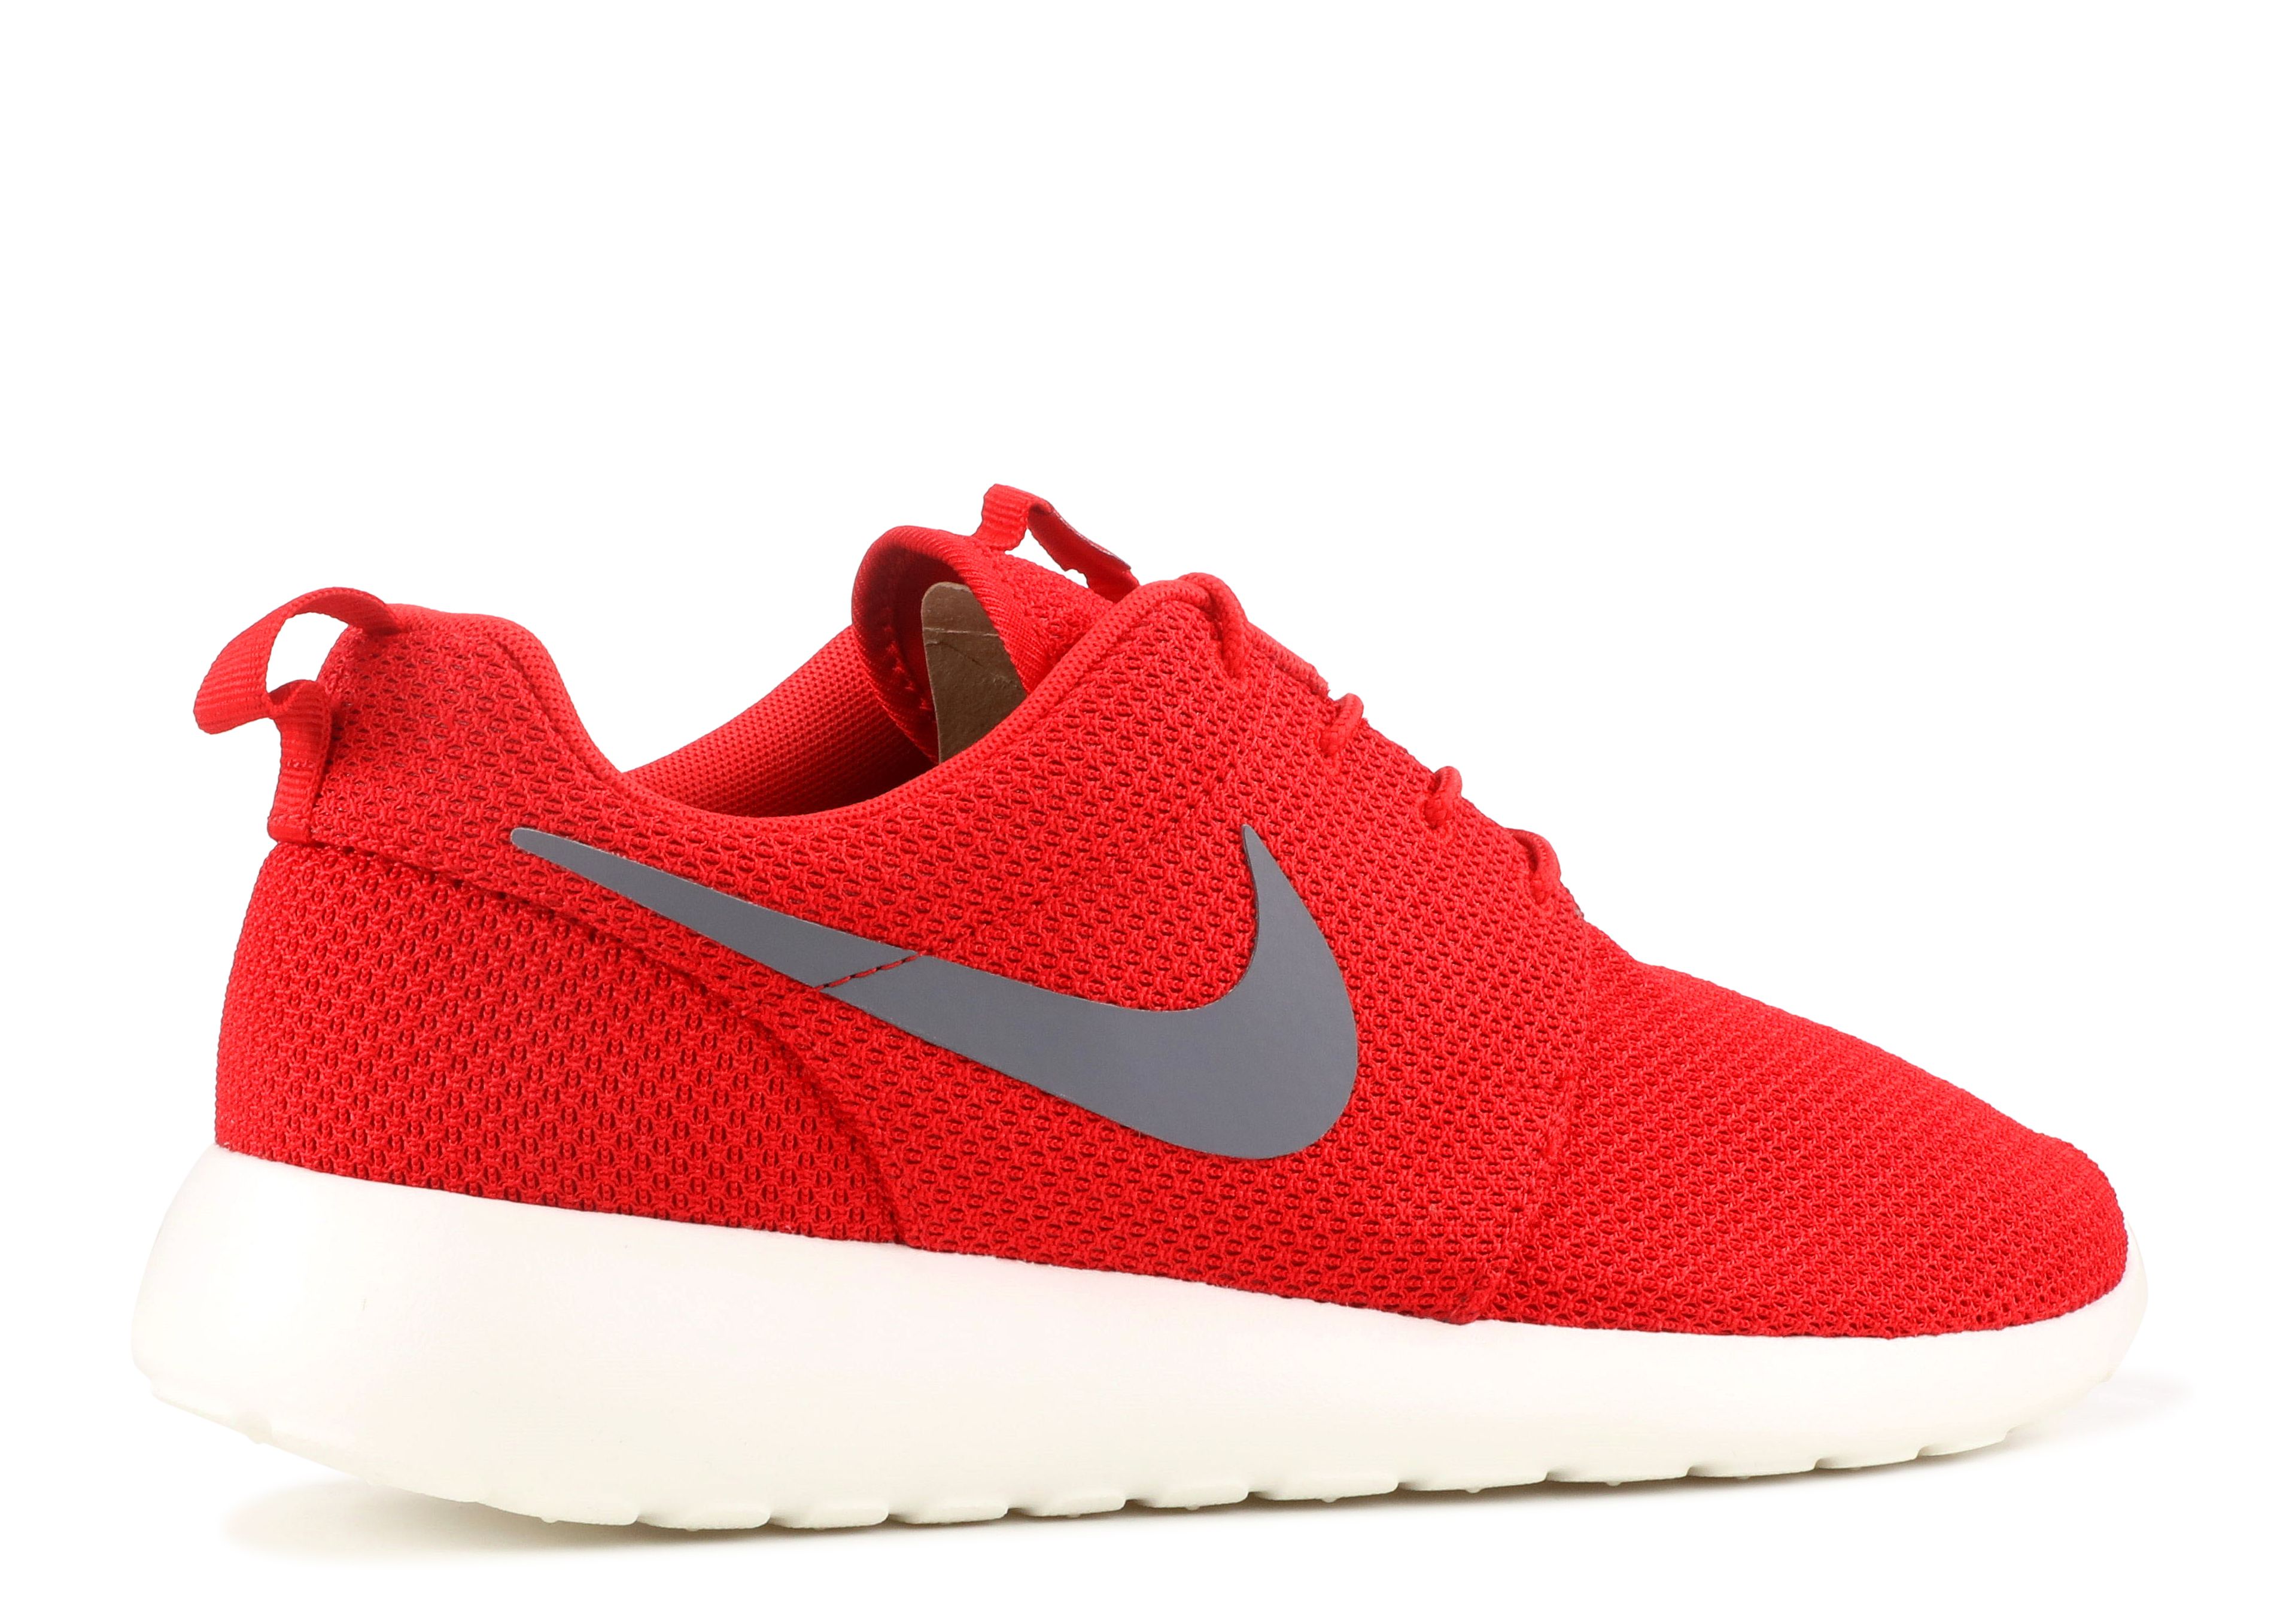 Roshe One 'Sport Red' - Nike - 511881 601 - sport red/cool grey-sail |  Flight Club